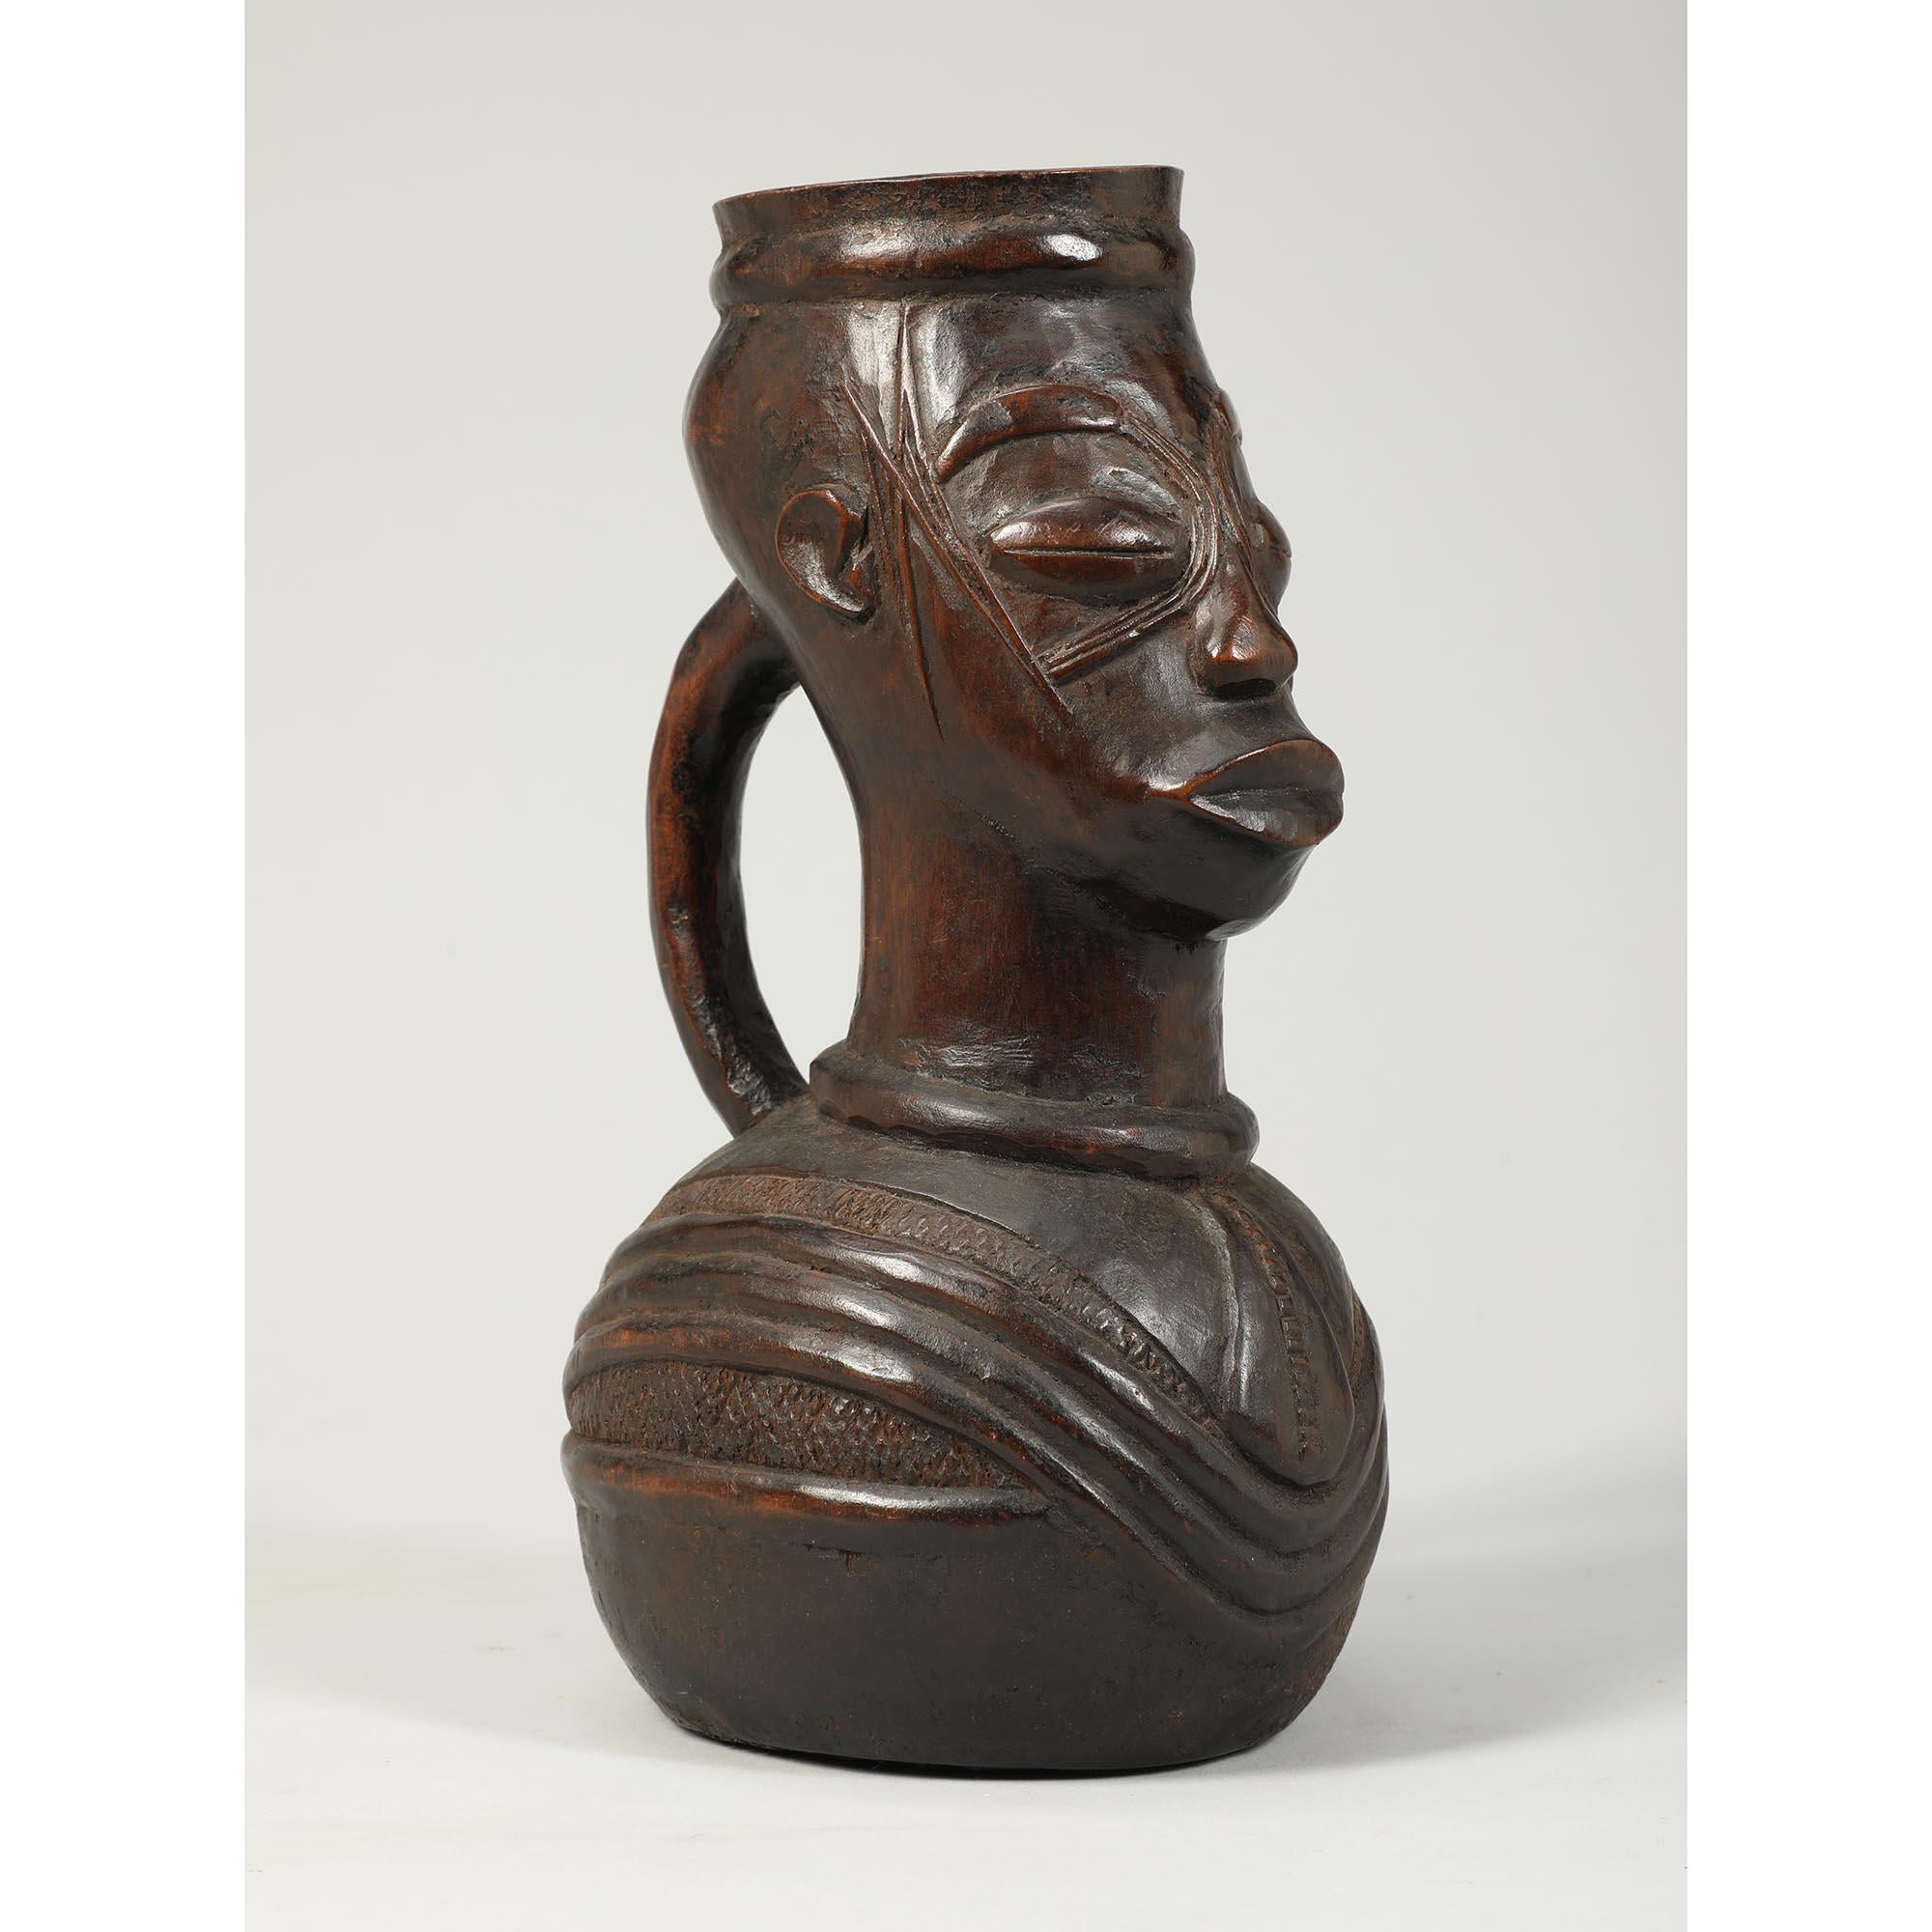 Early carved wood tribally used Mangbetu ritual vessel, from the Congo, Africa.
Ritual vessel in the form of a wood pitcher with handle, expressive face with scarifications, organic dry material inside.  Deep patina from traditional use.
Ex-Mark